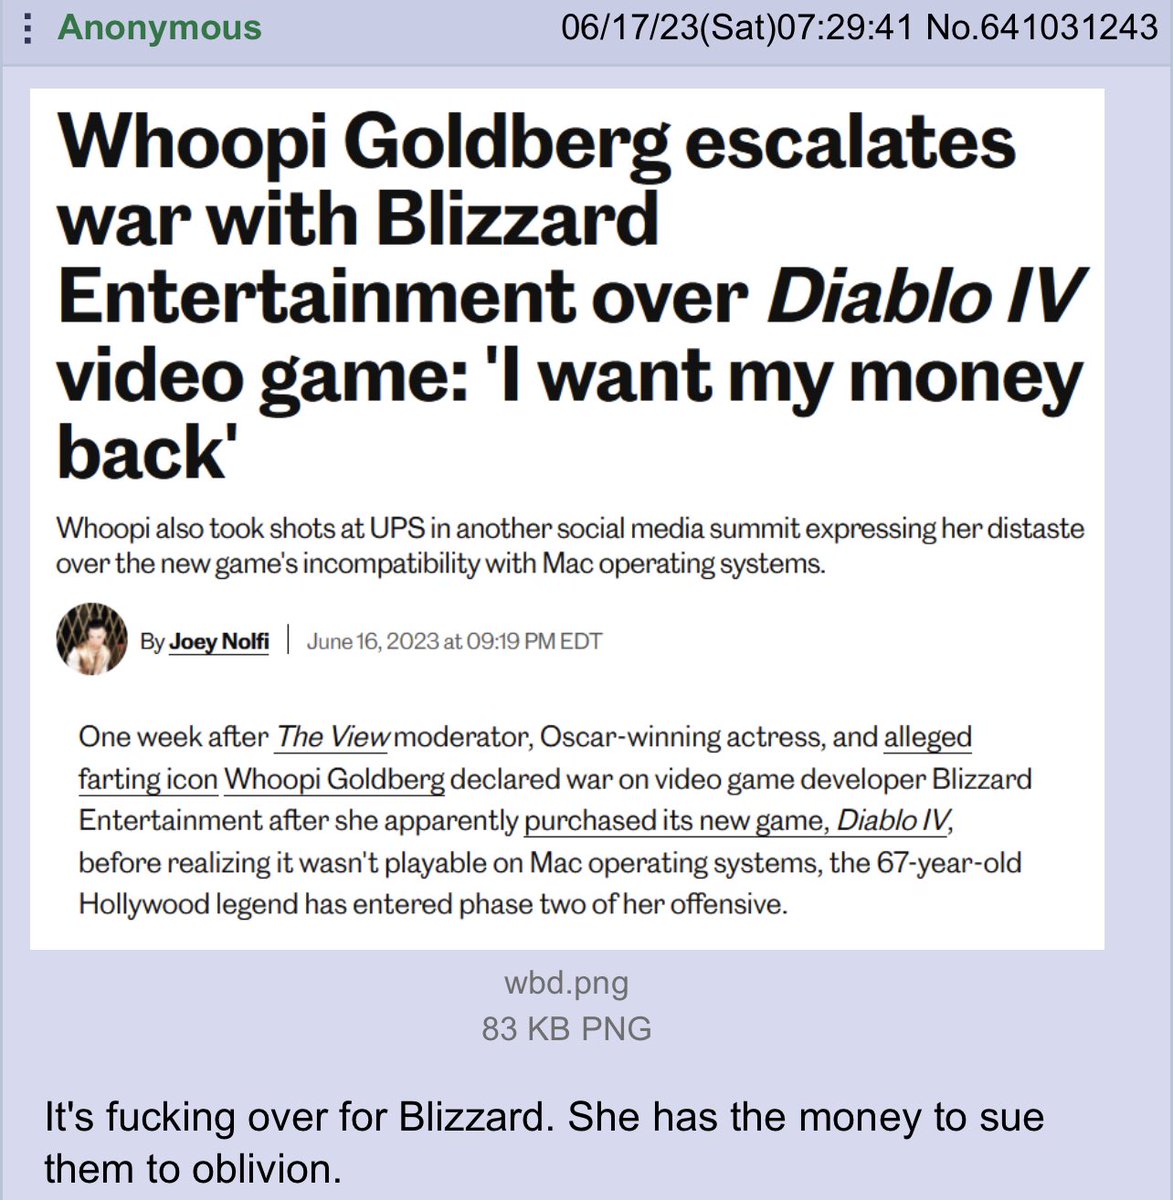 Will Whoopi Goldberg take out Activision Blizzard?